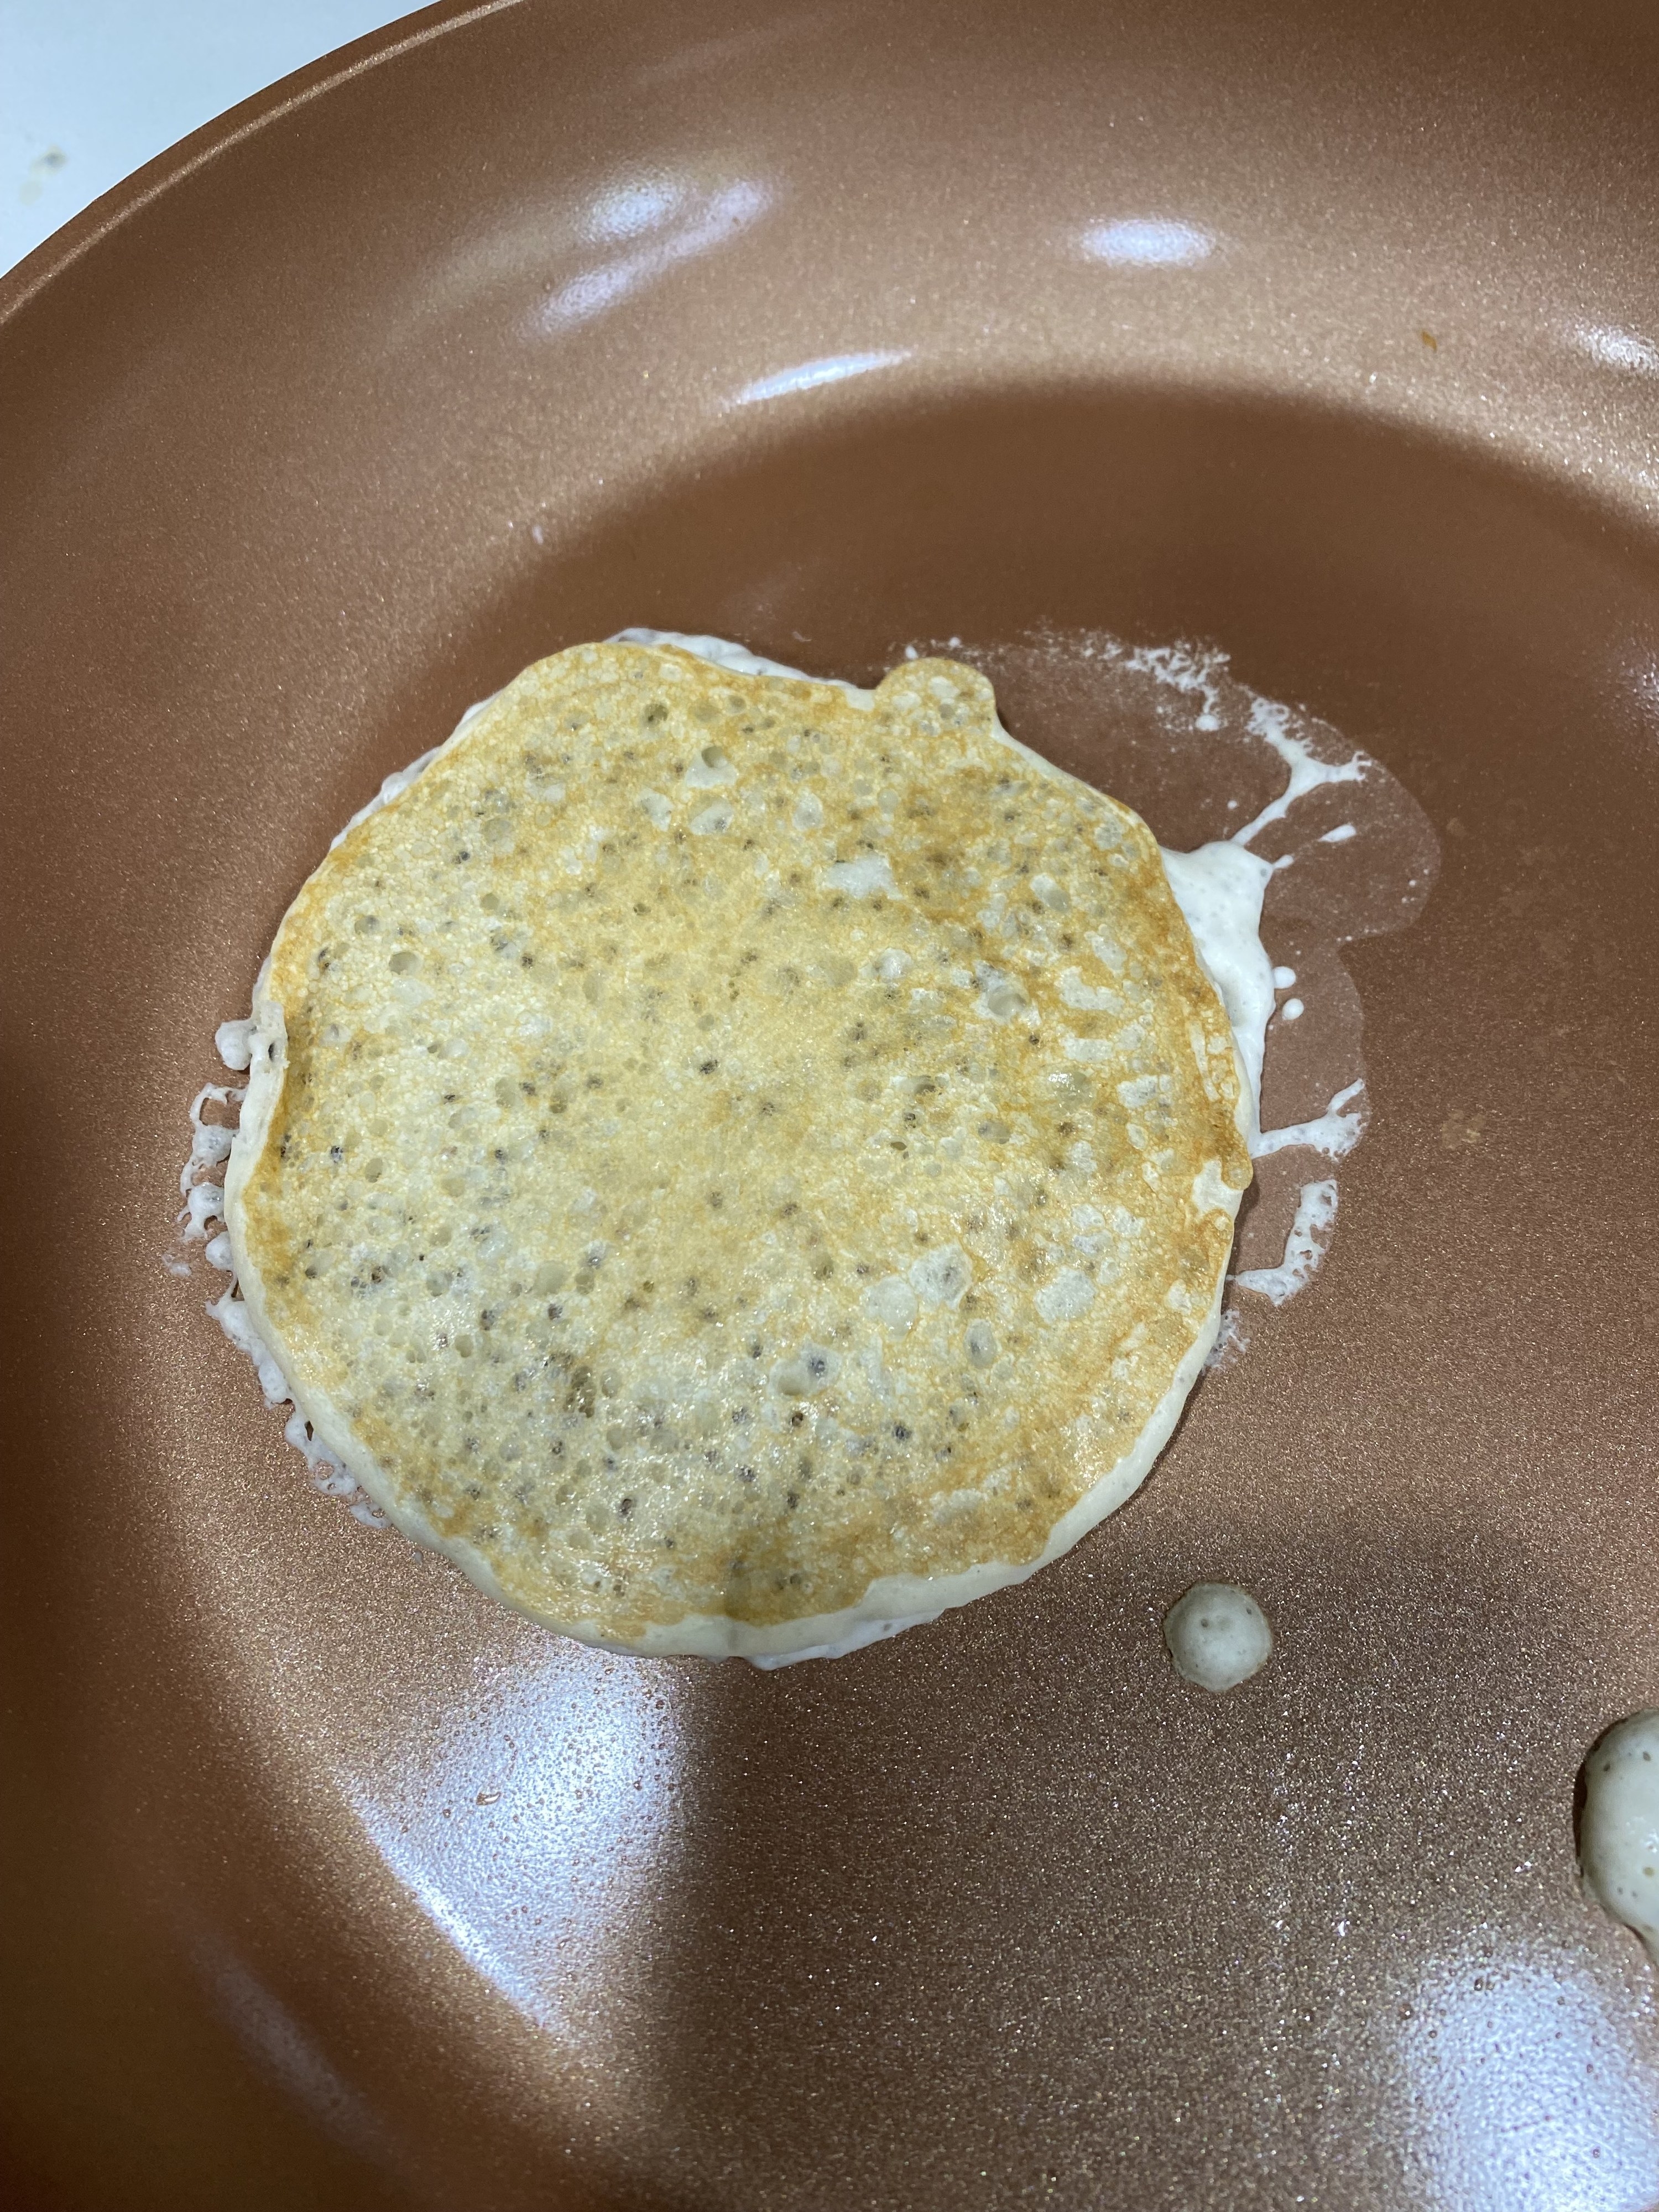 The pancake sizzling in the pan, with chia seeds dotted throughout the pancake